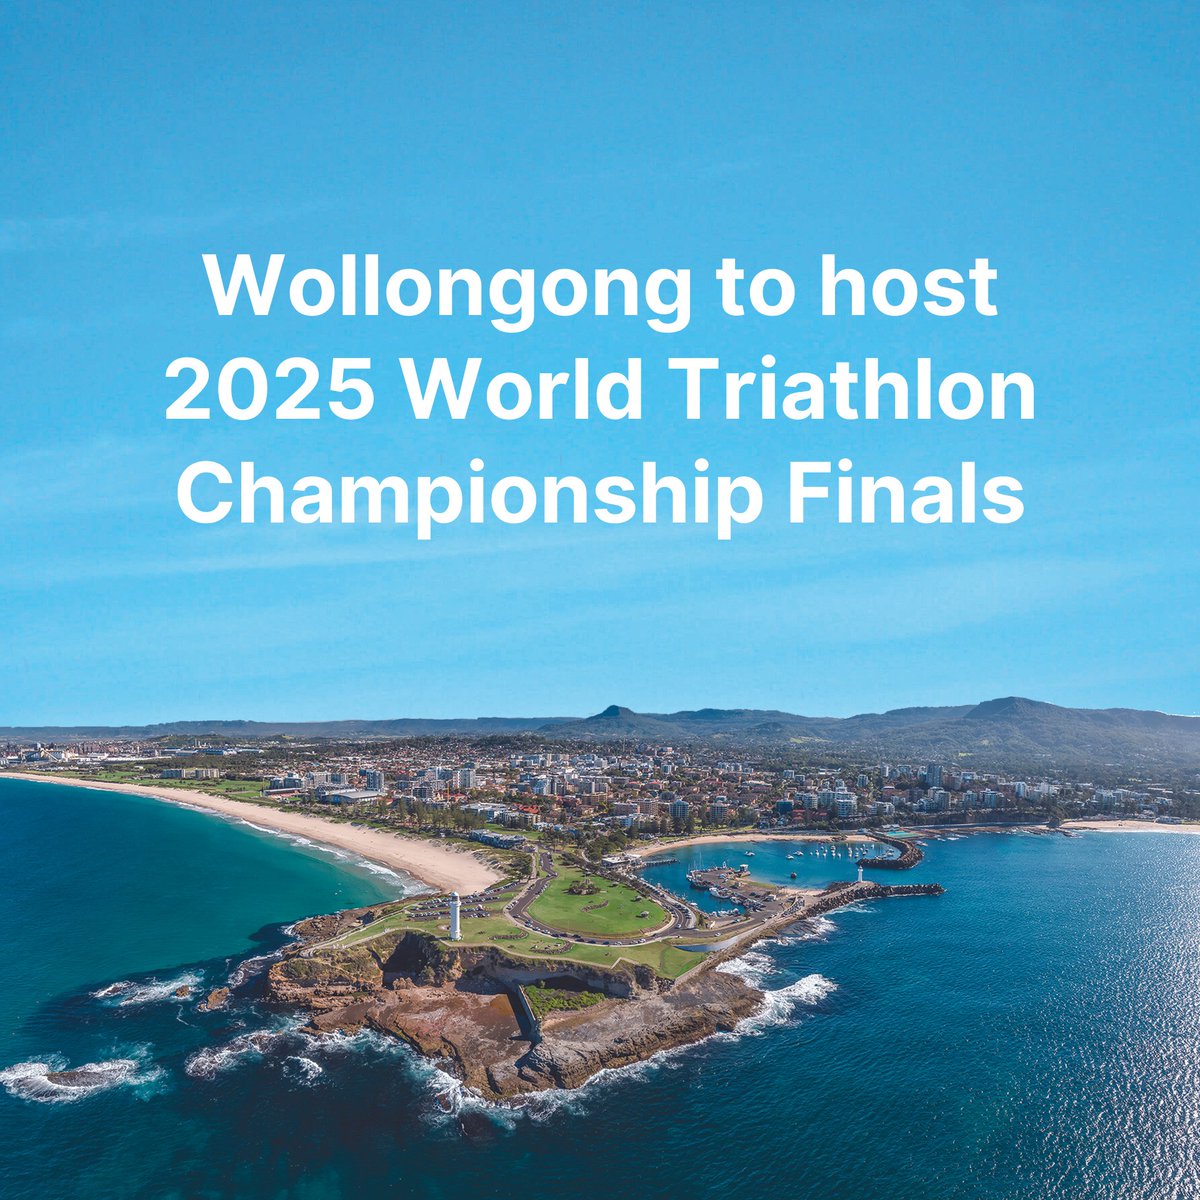 The World Triathlon Championship Finals are coming back to Australia 🇦🇺 🙌

📰 | bit.ly/3TOF6GK

#WollongongFinals #BeYourExtraordinary